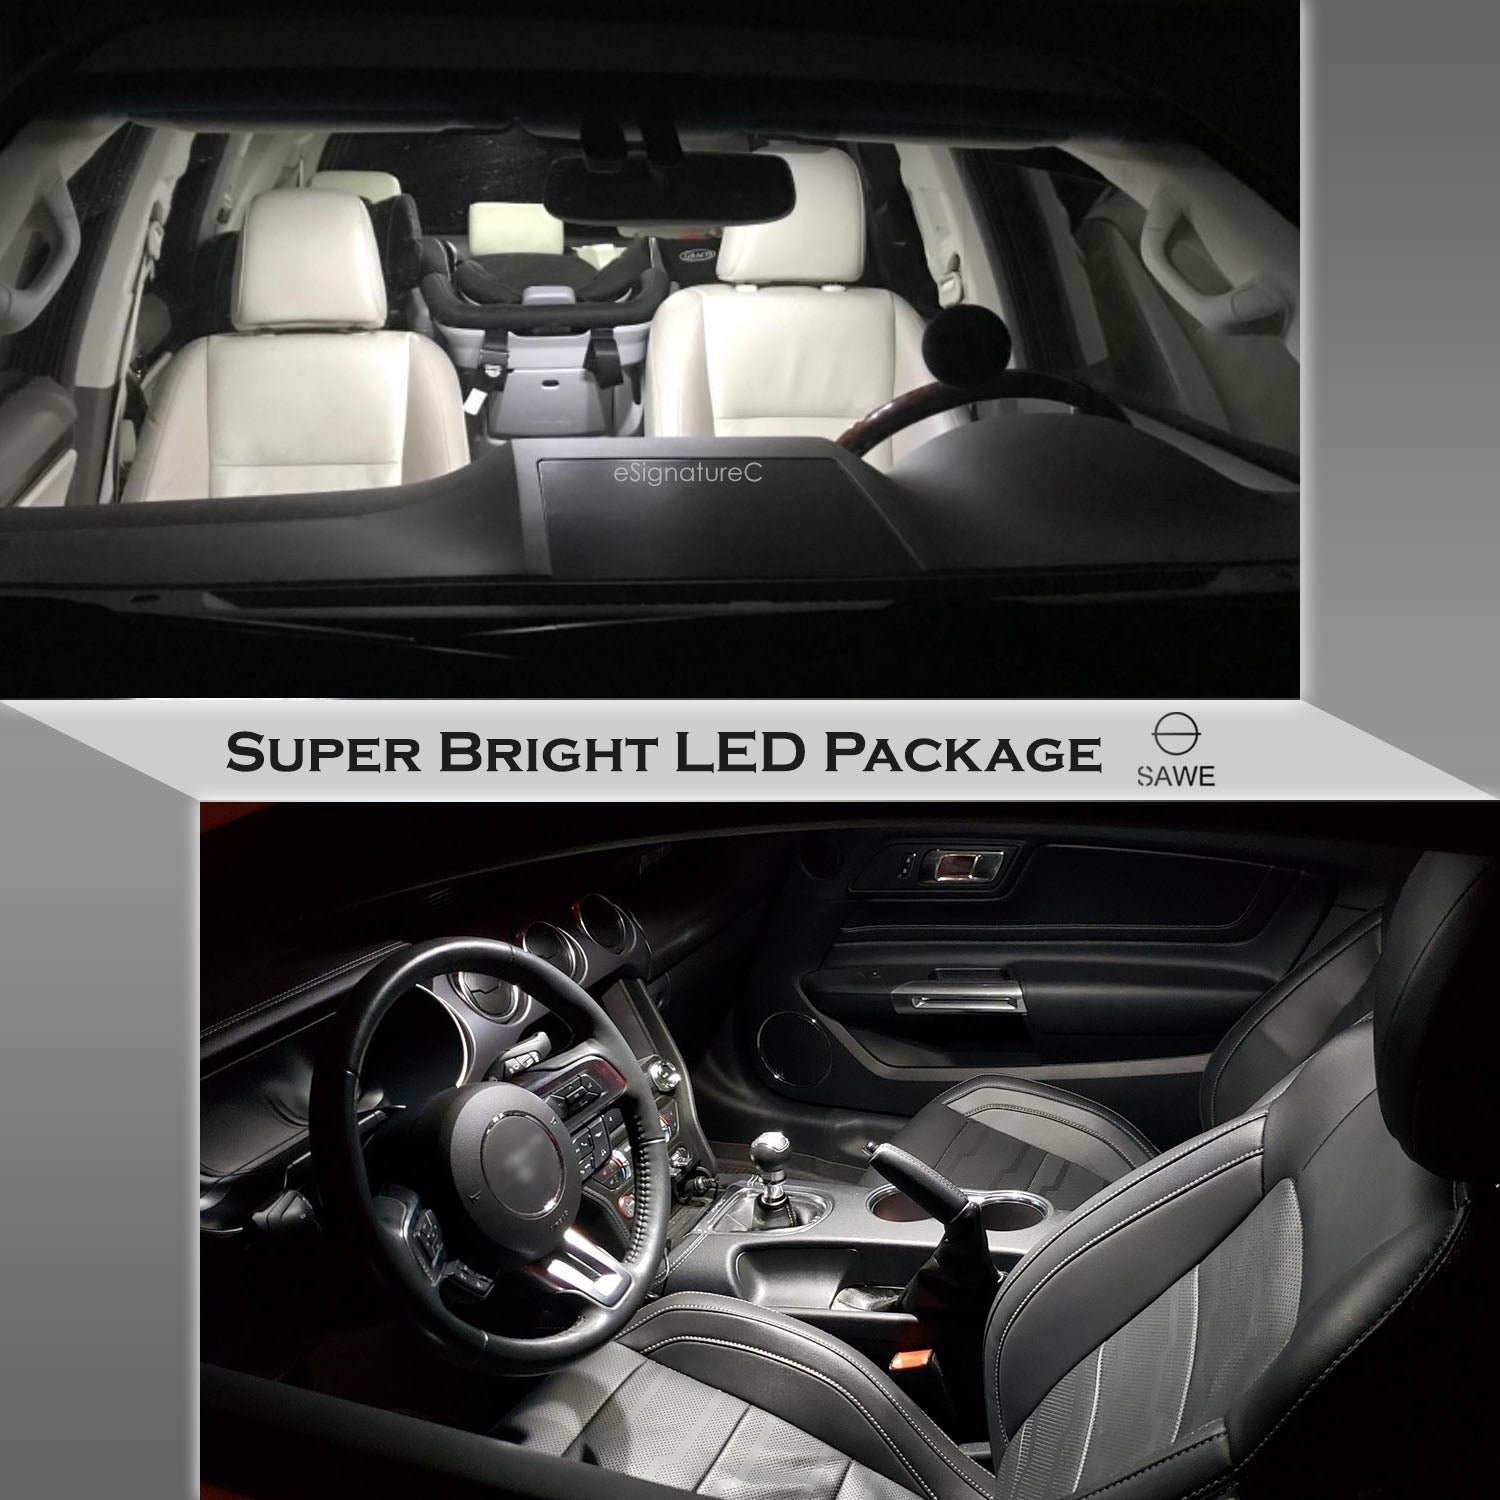 For Cadillac SRX Interior LED Lights - Dome & Map Light Bulbs Package Kit for 2004 - 2009 - White